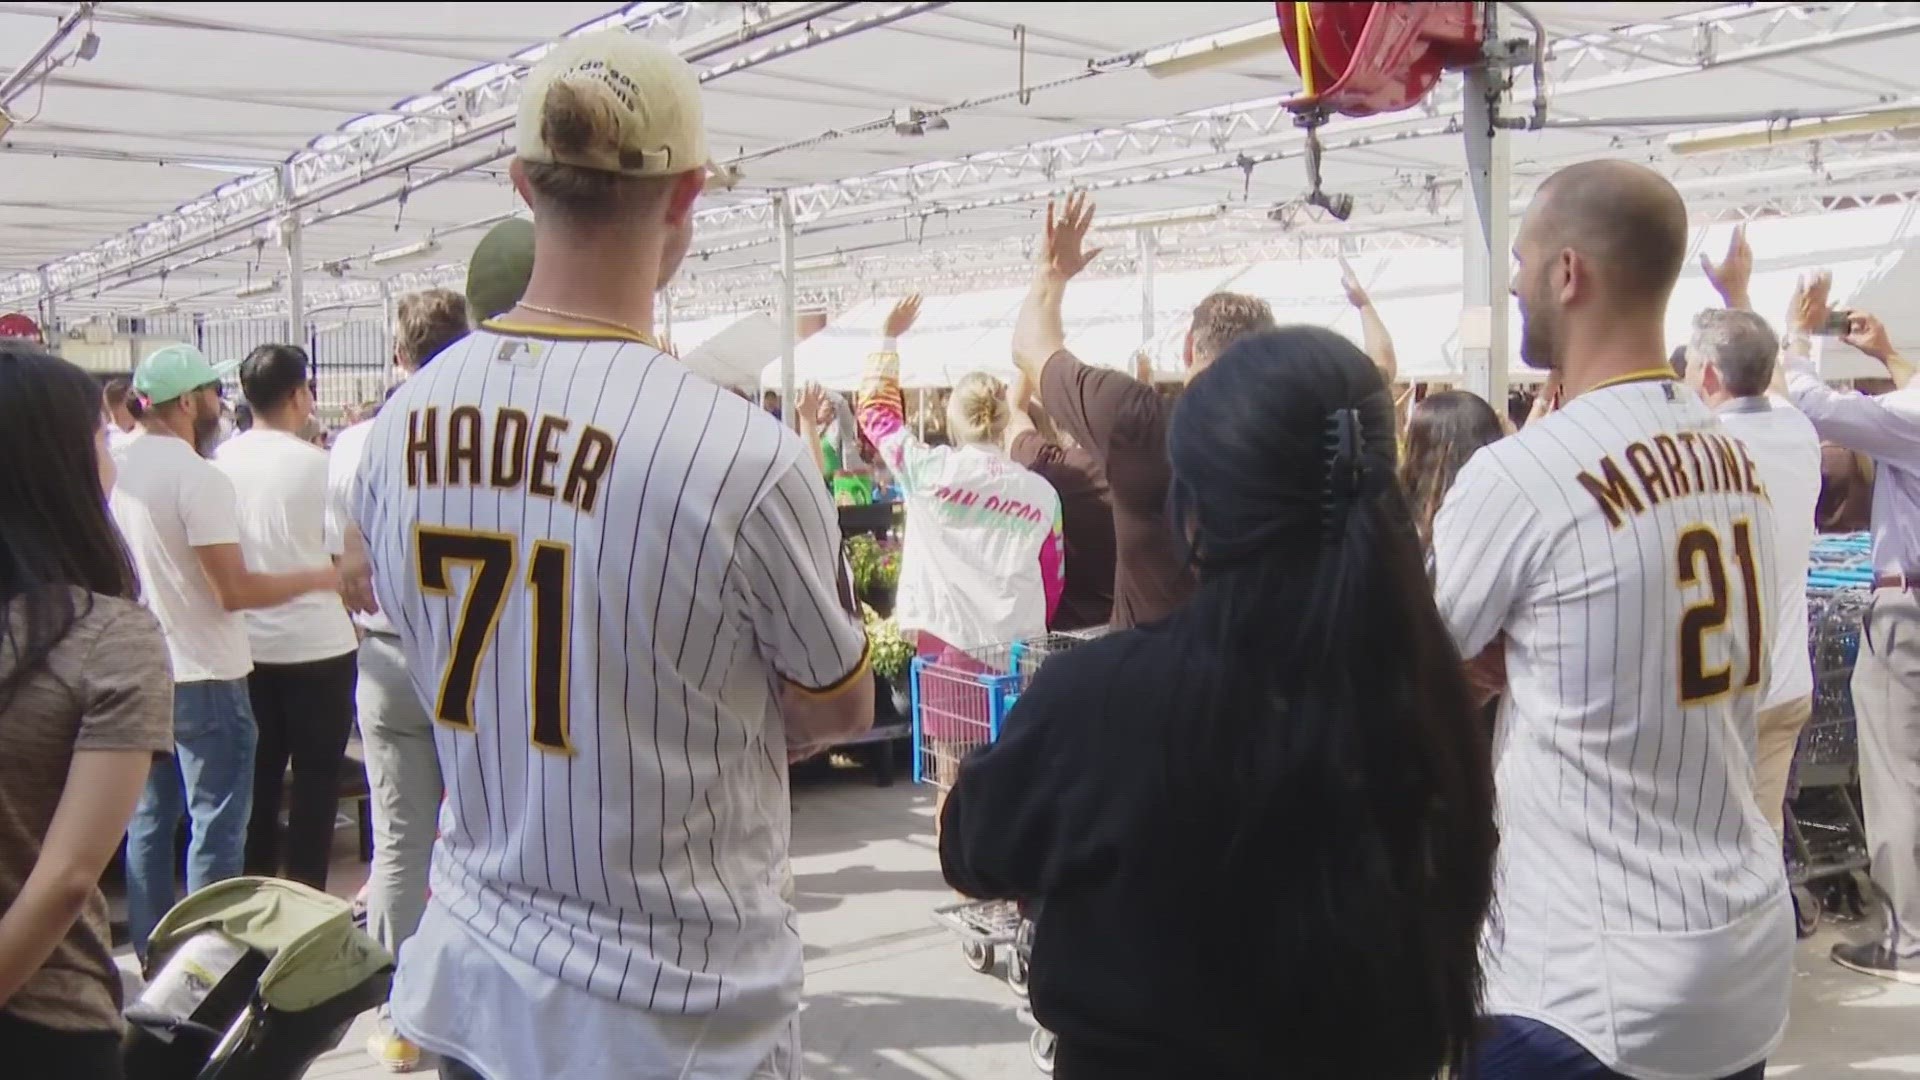 Nearly 100 students from the Monarch School went on a shopping spree with Padres players and volunteers from the organization.